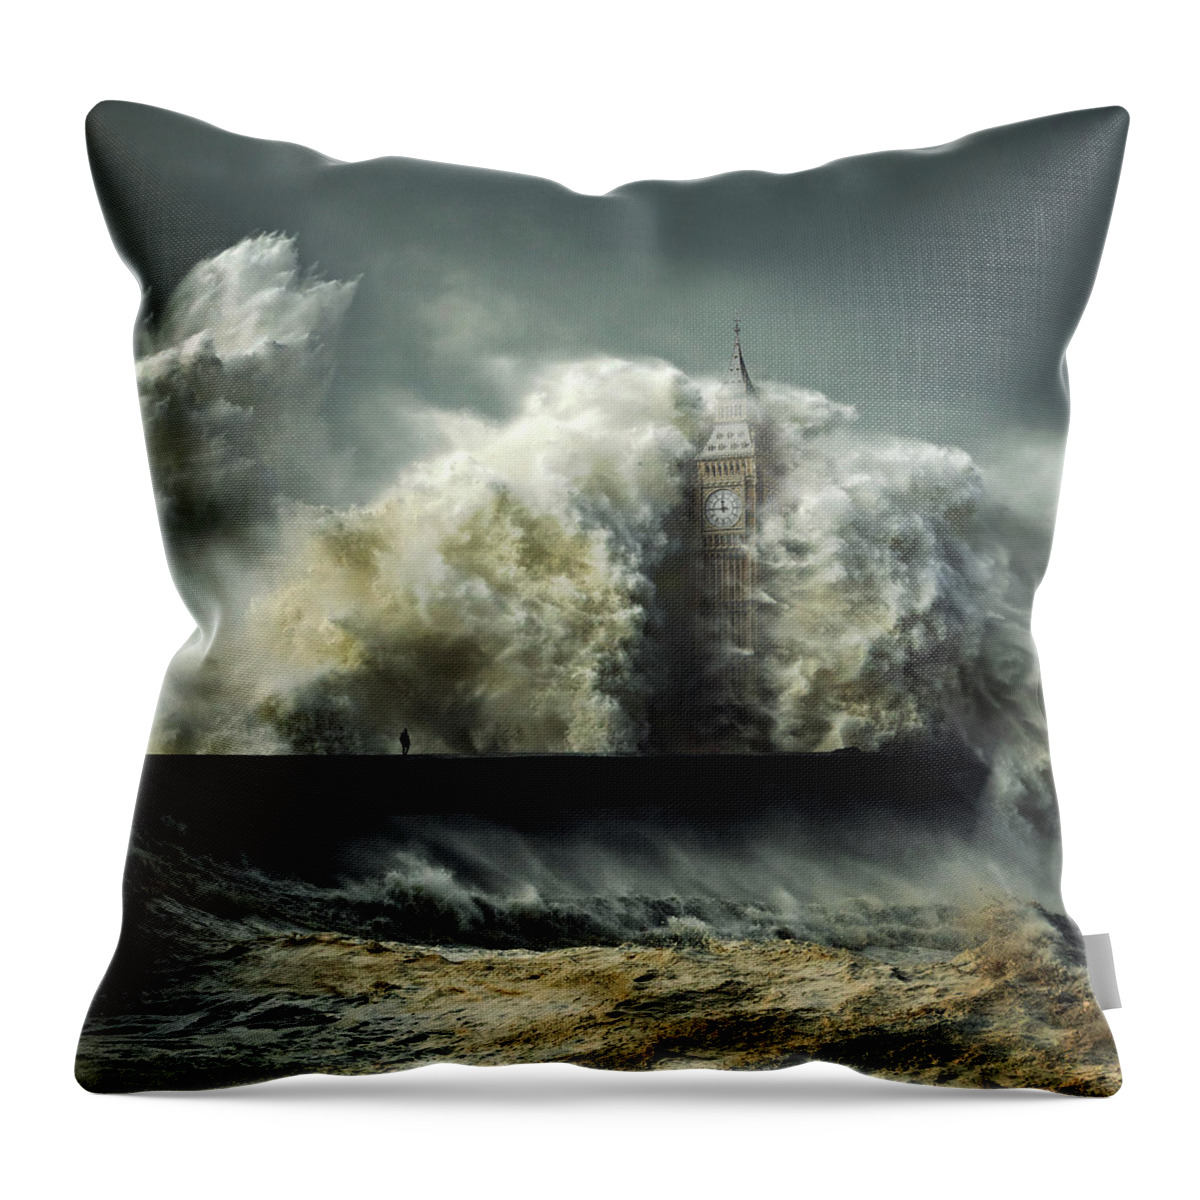 Photo Manipulation Throw Pillow featuring the digital art Flood by Zoltan Toth